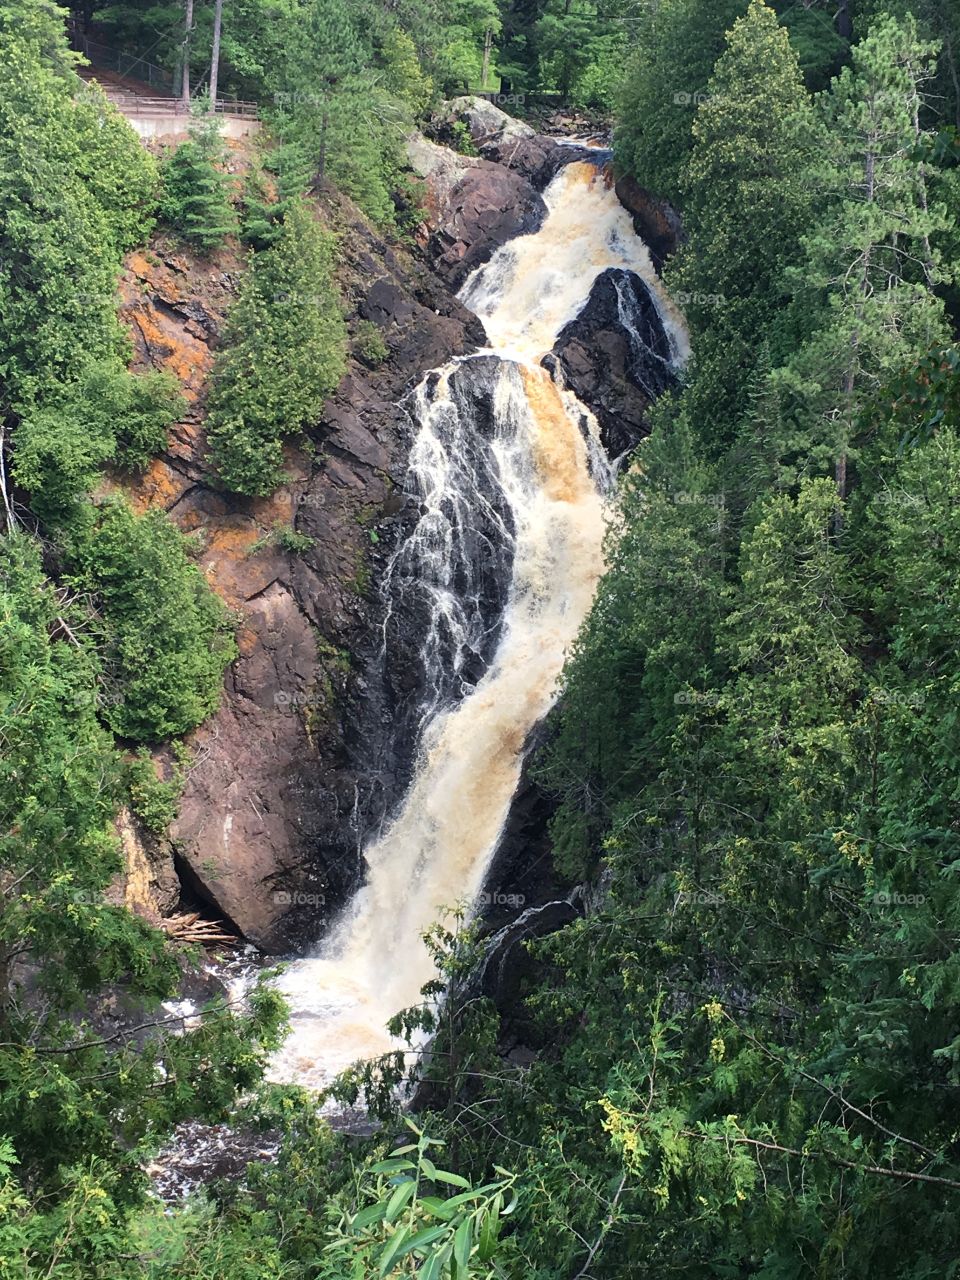 The largest waterfall at Pattison State Park in Wisconsin